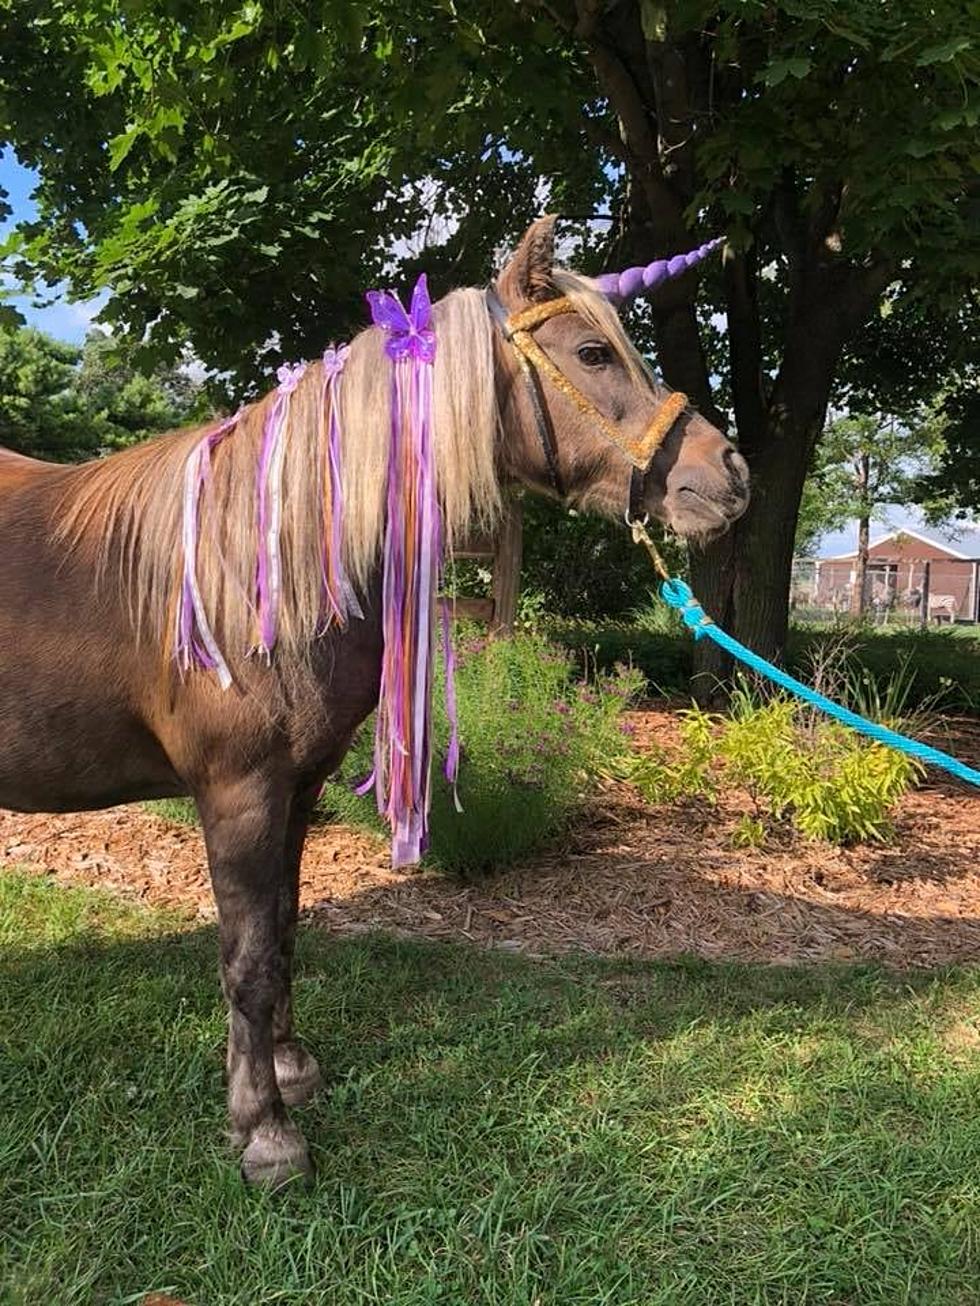 Calling All Kids! Unicorns Are Back at Belvidere’s Summerfield Zoo